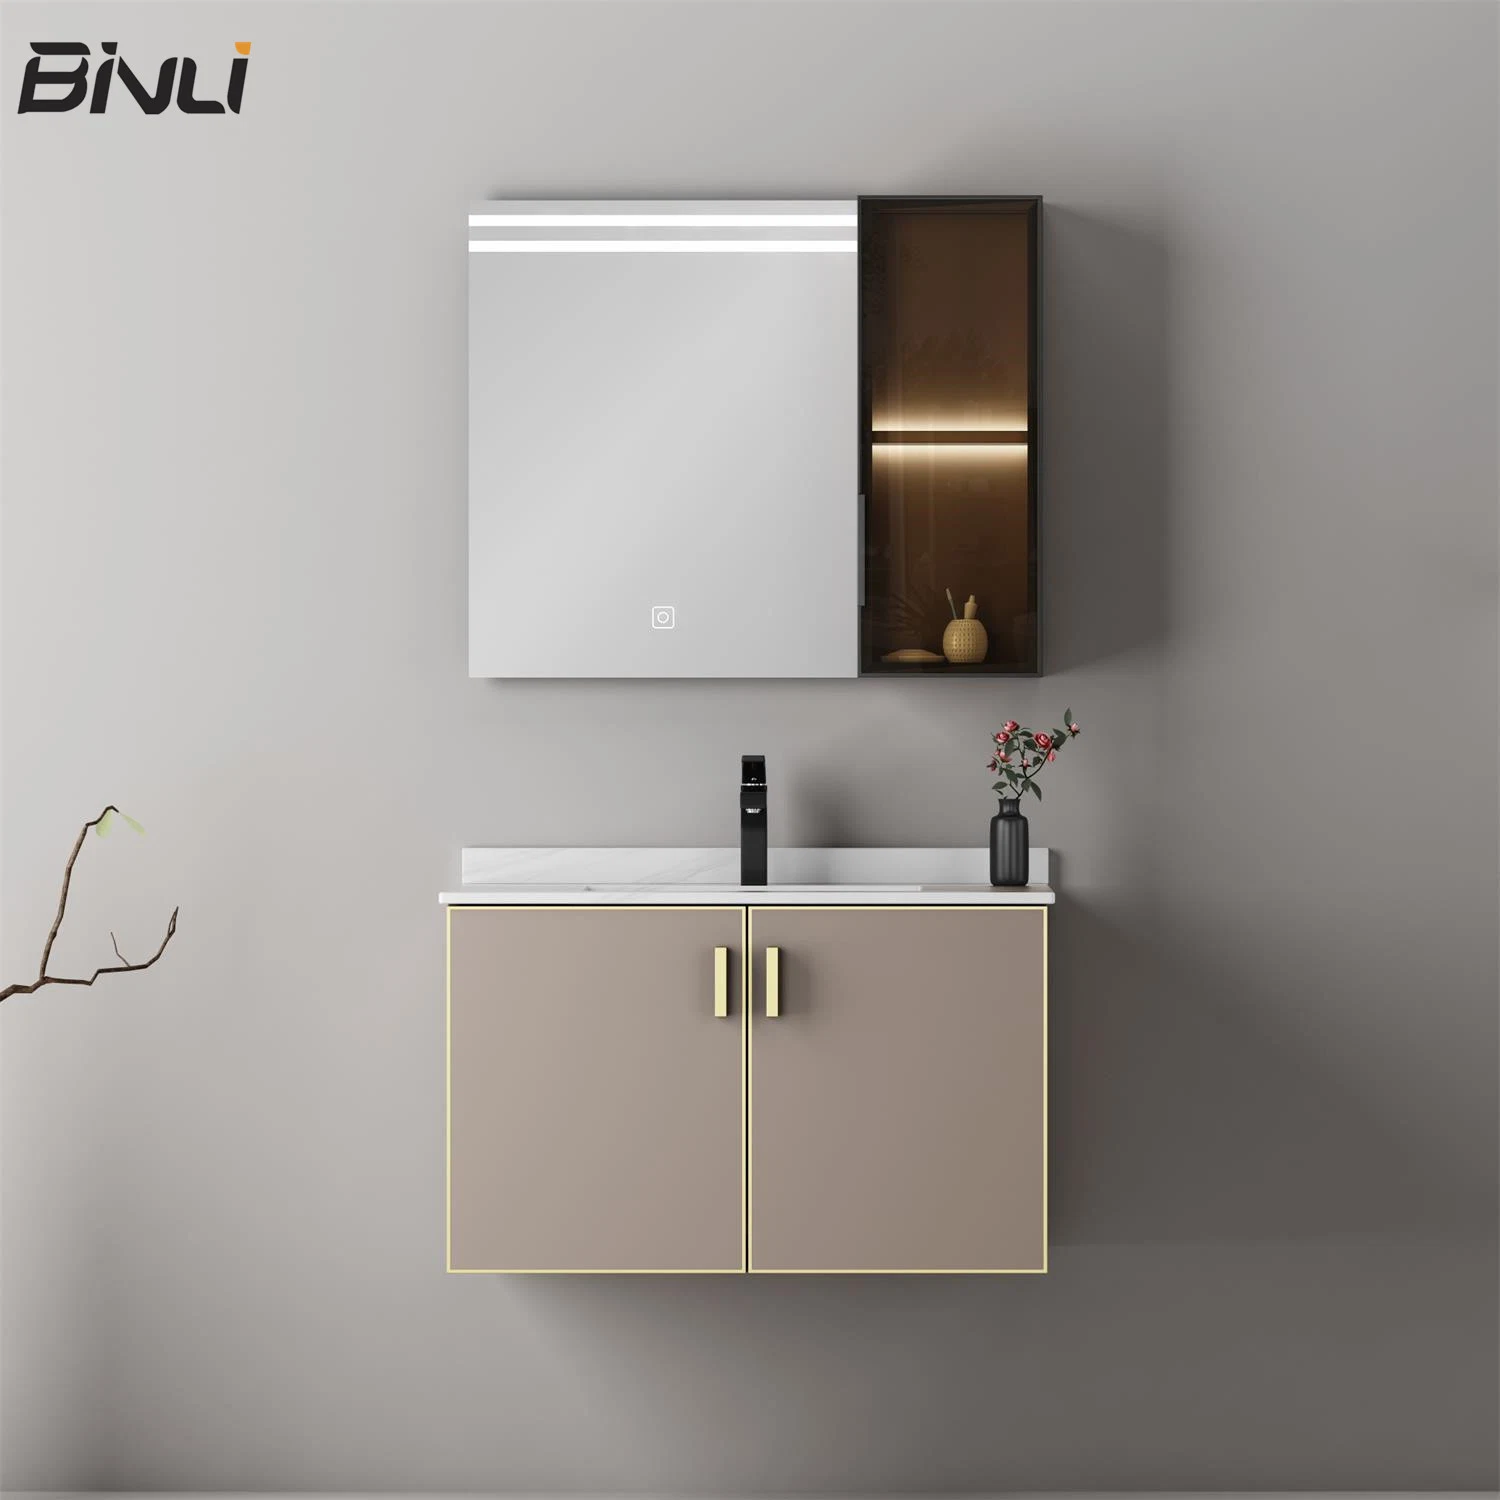 High Quality Solid Wood Plywood Double Doors Bathroom Basin Cabinet Vanity Sets with Smart Mirror, Countertop